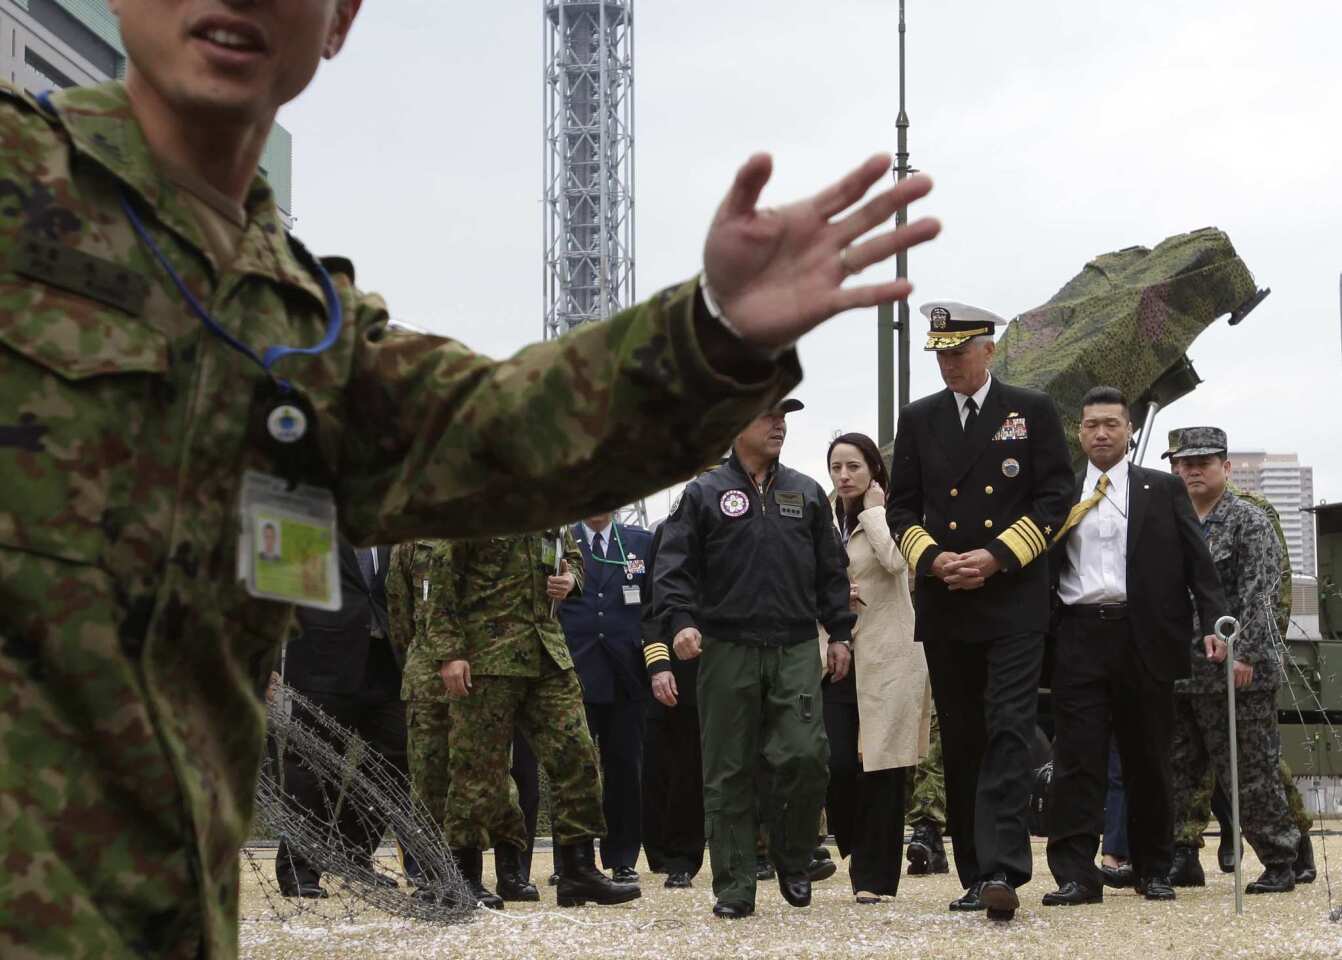 Patriot missiles ready in Japan